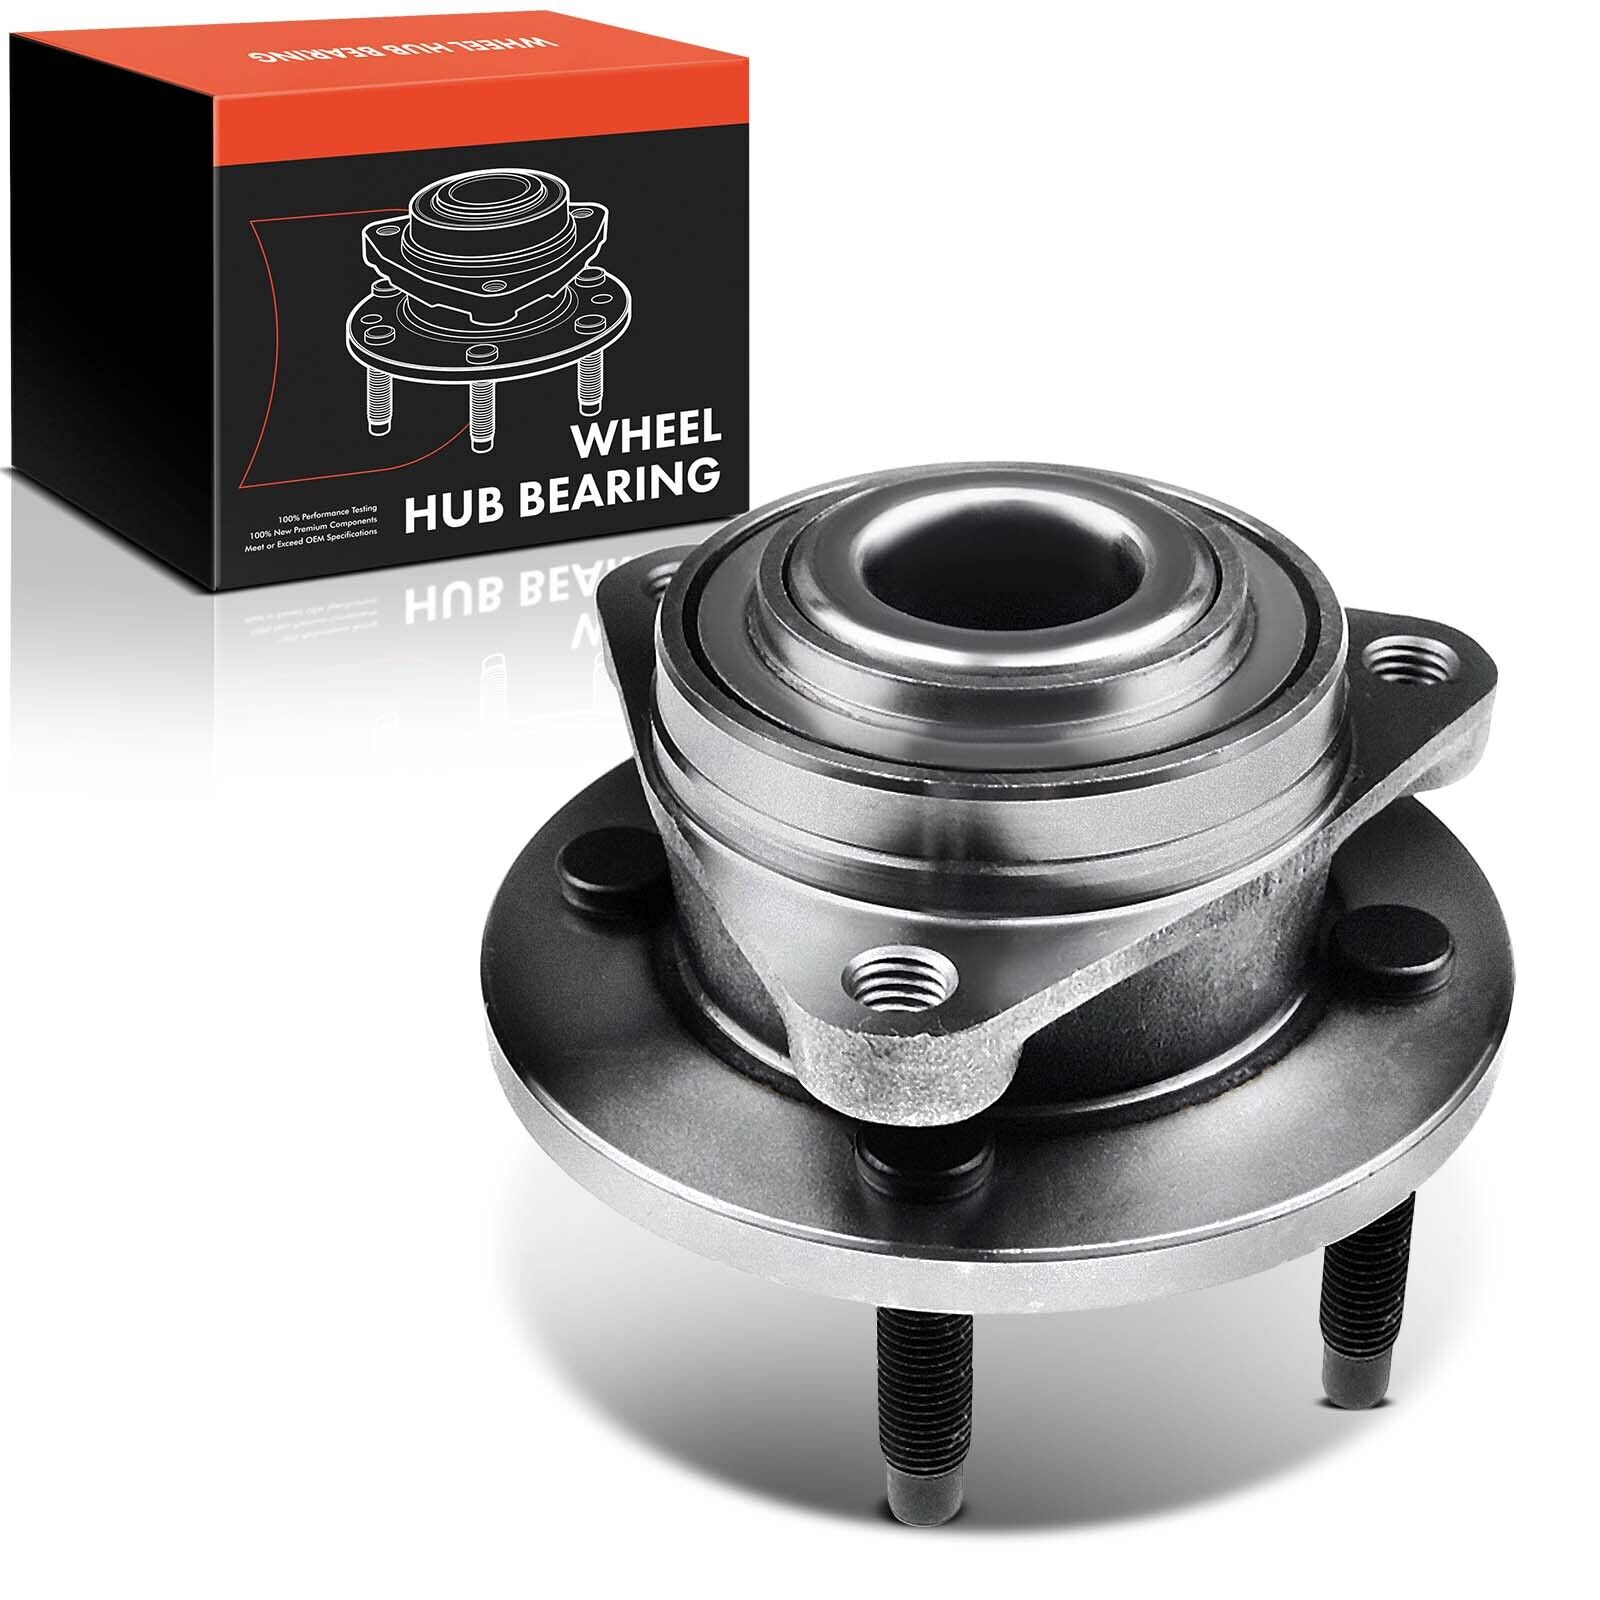 1x Front L / R Wheel Hub Bearing Assembly for Chevy Cobalt Pontiac G5 Saturn Ion